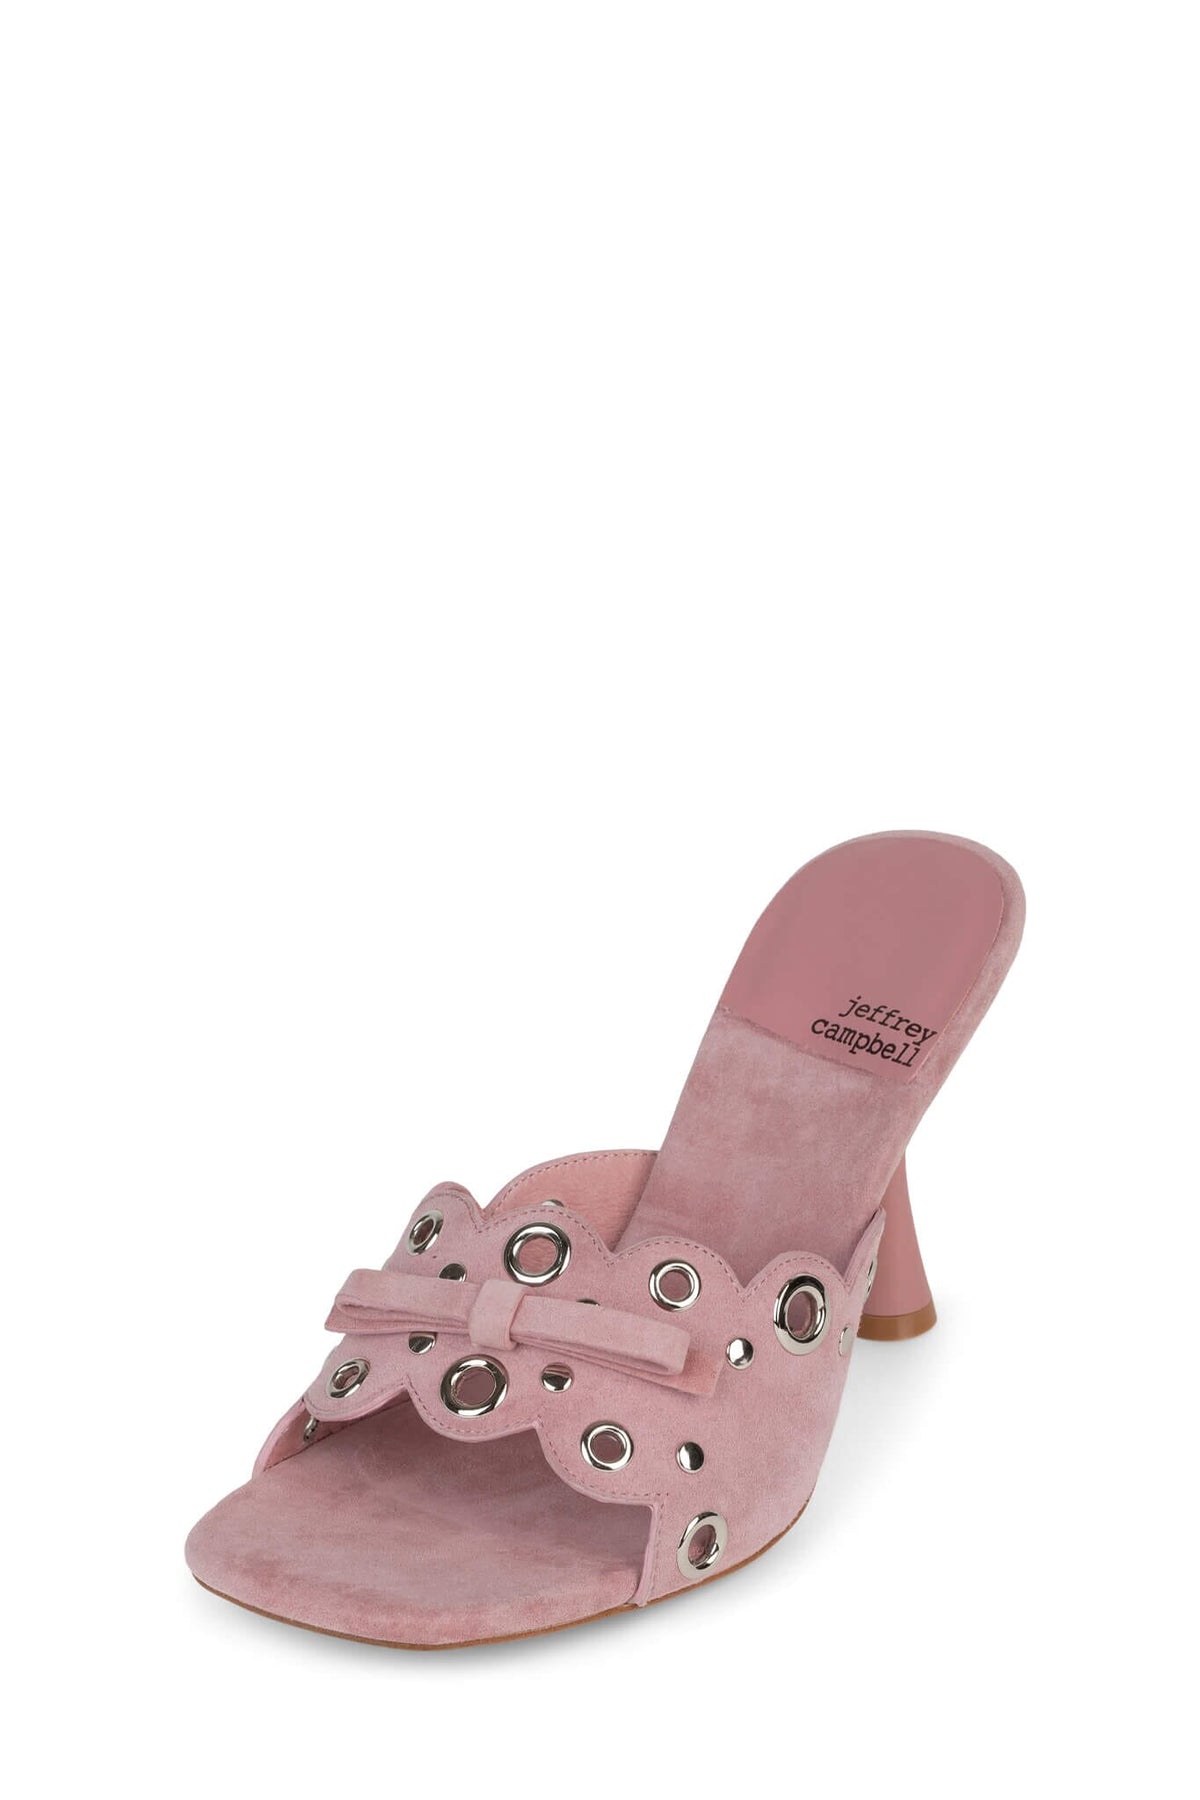 ODOM Jeffrey Campbell Heeled Sandals Pink Suede Silver